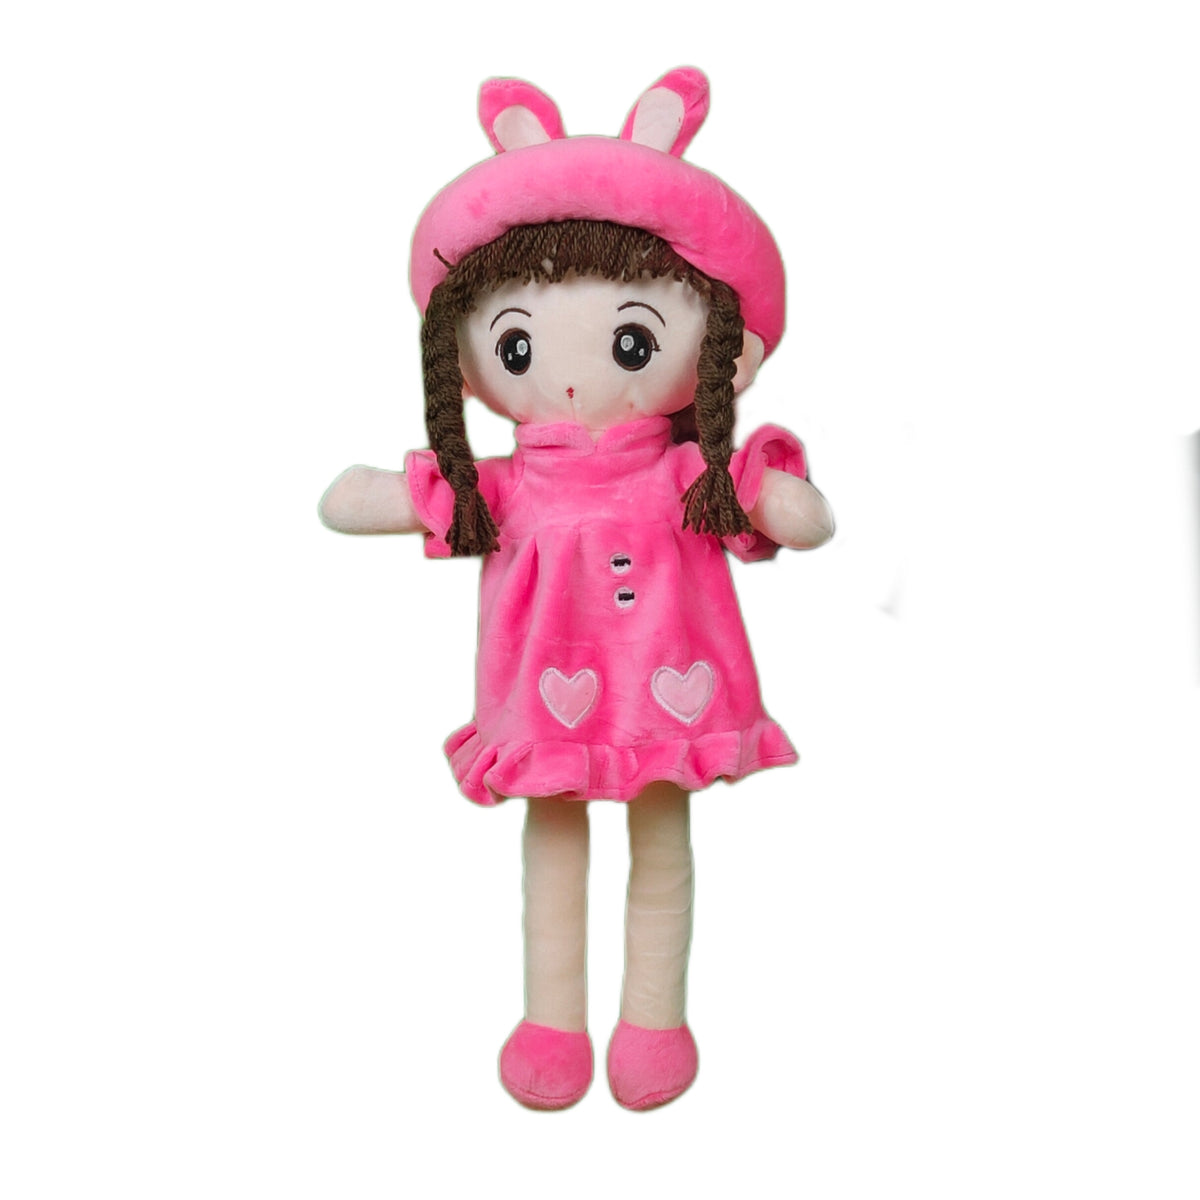 Play Hour Eva Rag Doll Plush Soft Toy Wearing Pink Frock for Ages 3 Years and Up, 45cm